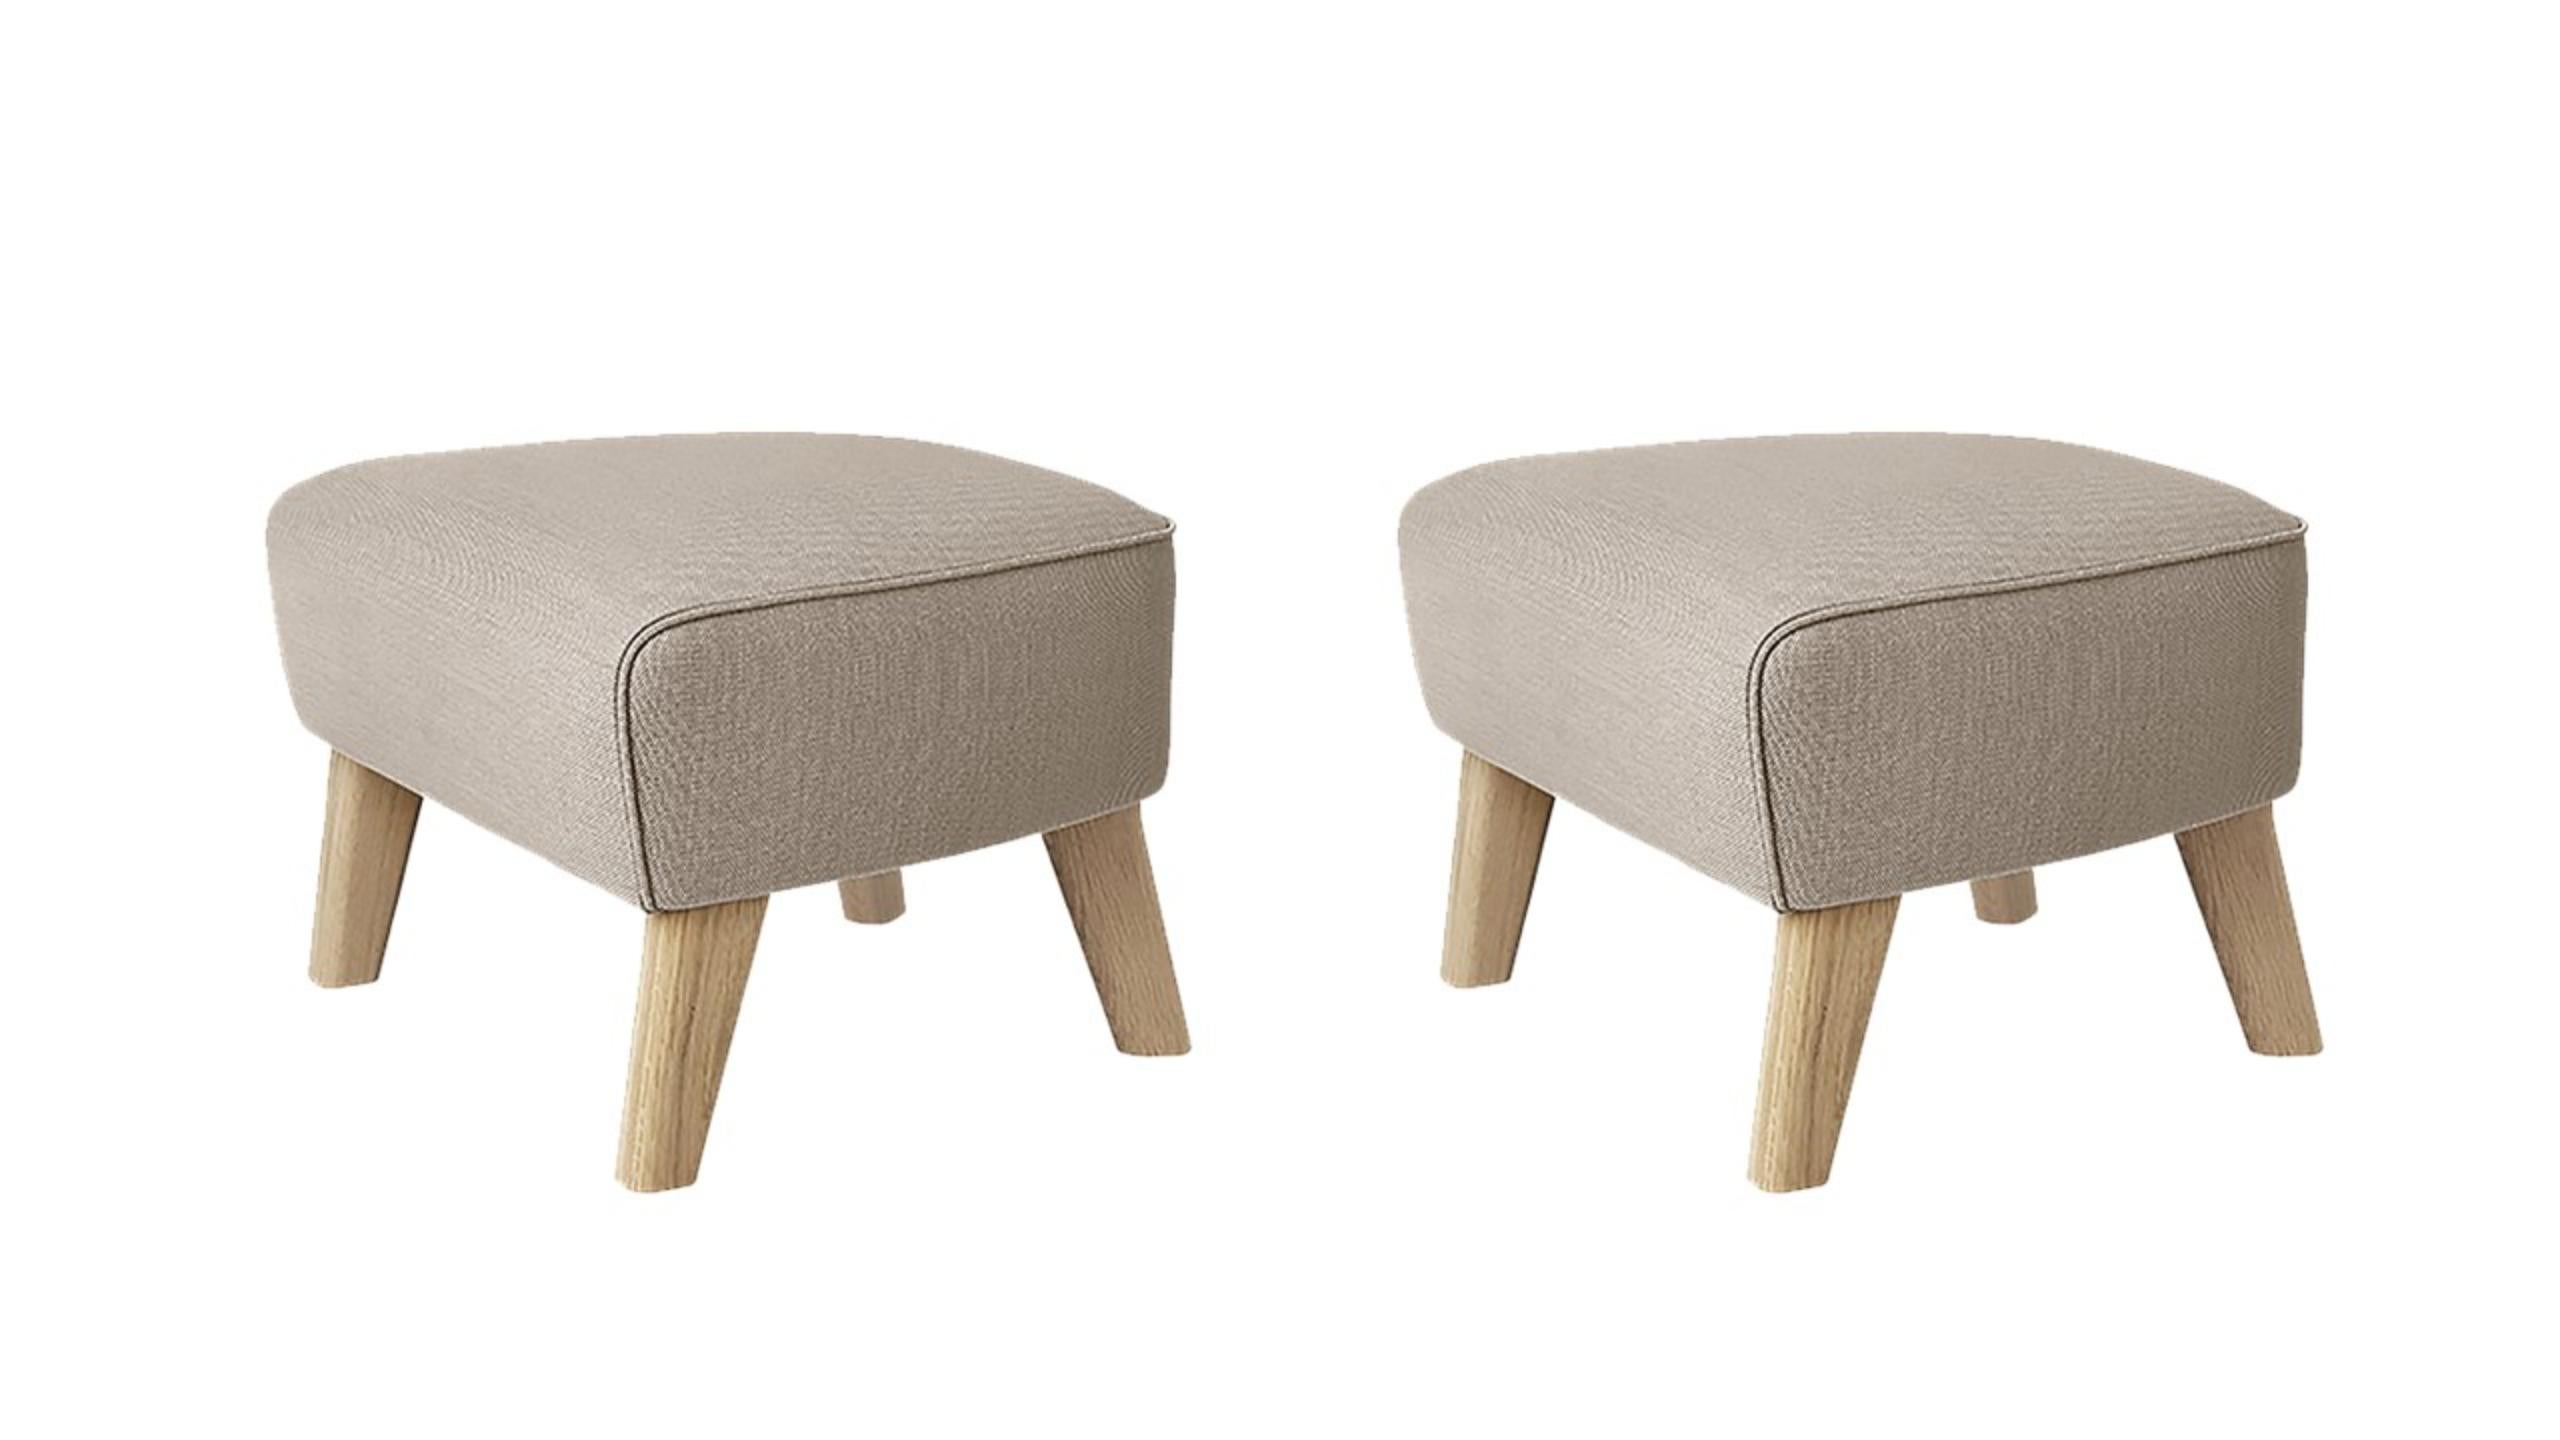 Set of 2 beige and natural oak Sahco Zero Footstool by Lassen
Dimensions: W 56 x D 58 x H 40 cm 
Materials: Textile
Also available: other colors available.

The My Own Chair Footstool has been designed in the same spirit as Flemming Lassen’s